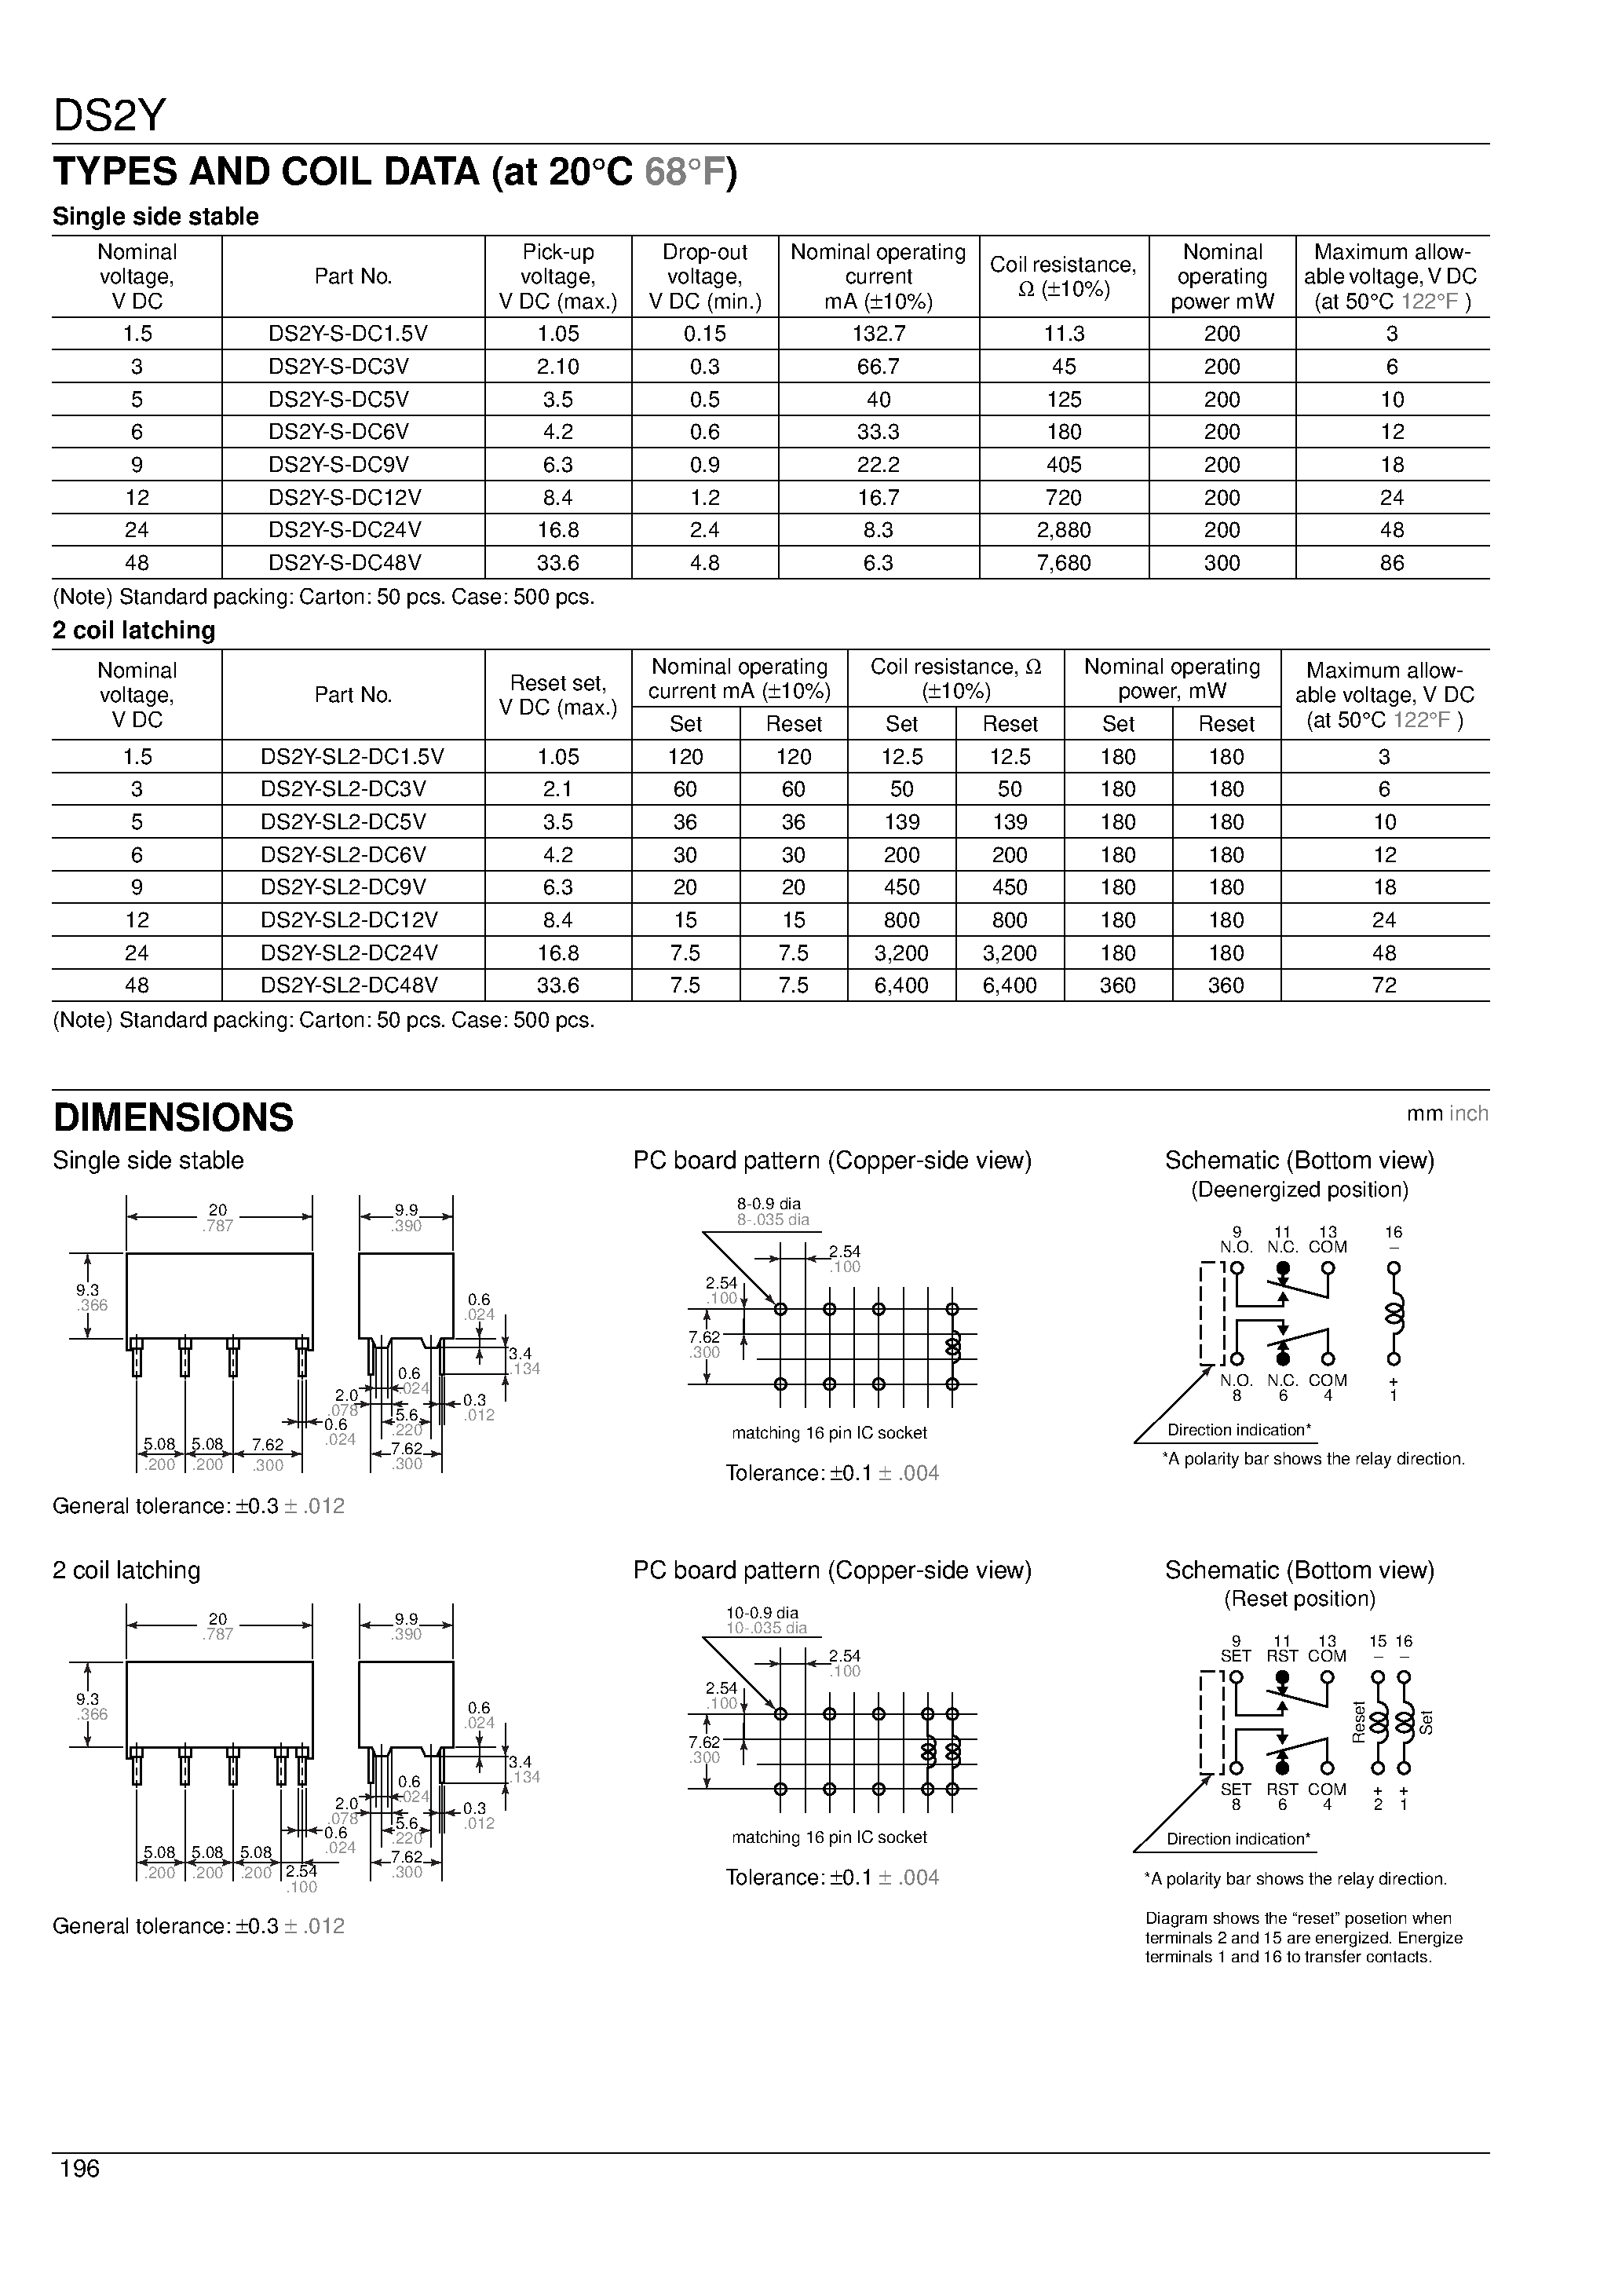 Datasheet DS2Y-SL2-DC9V - 2 Form C contact High sensitivity-200 mW nominal operating power page 2